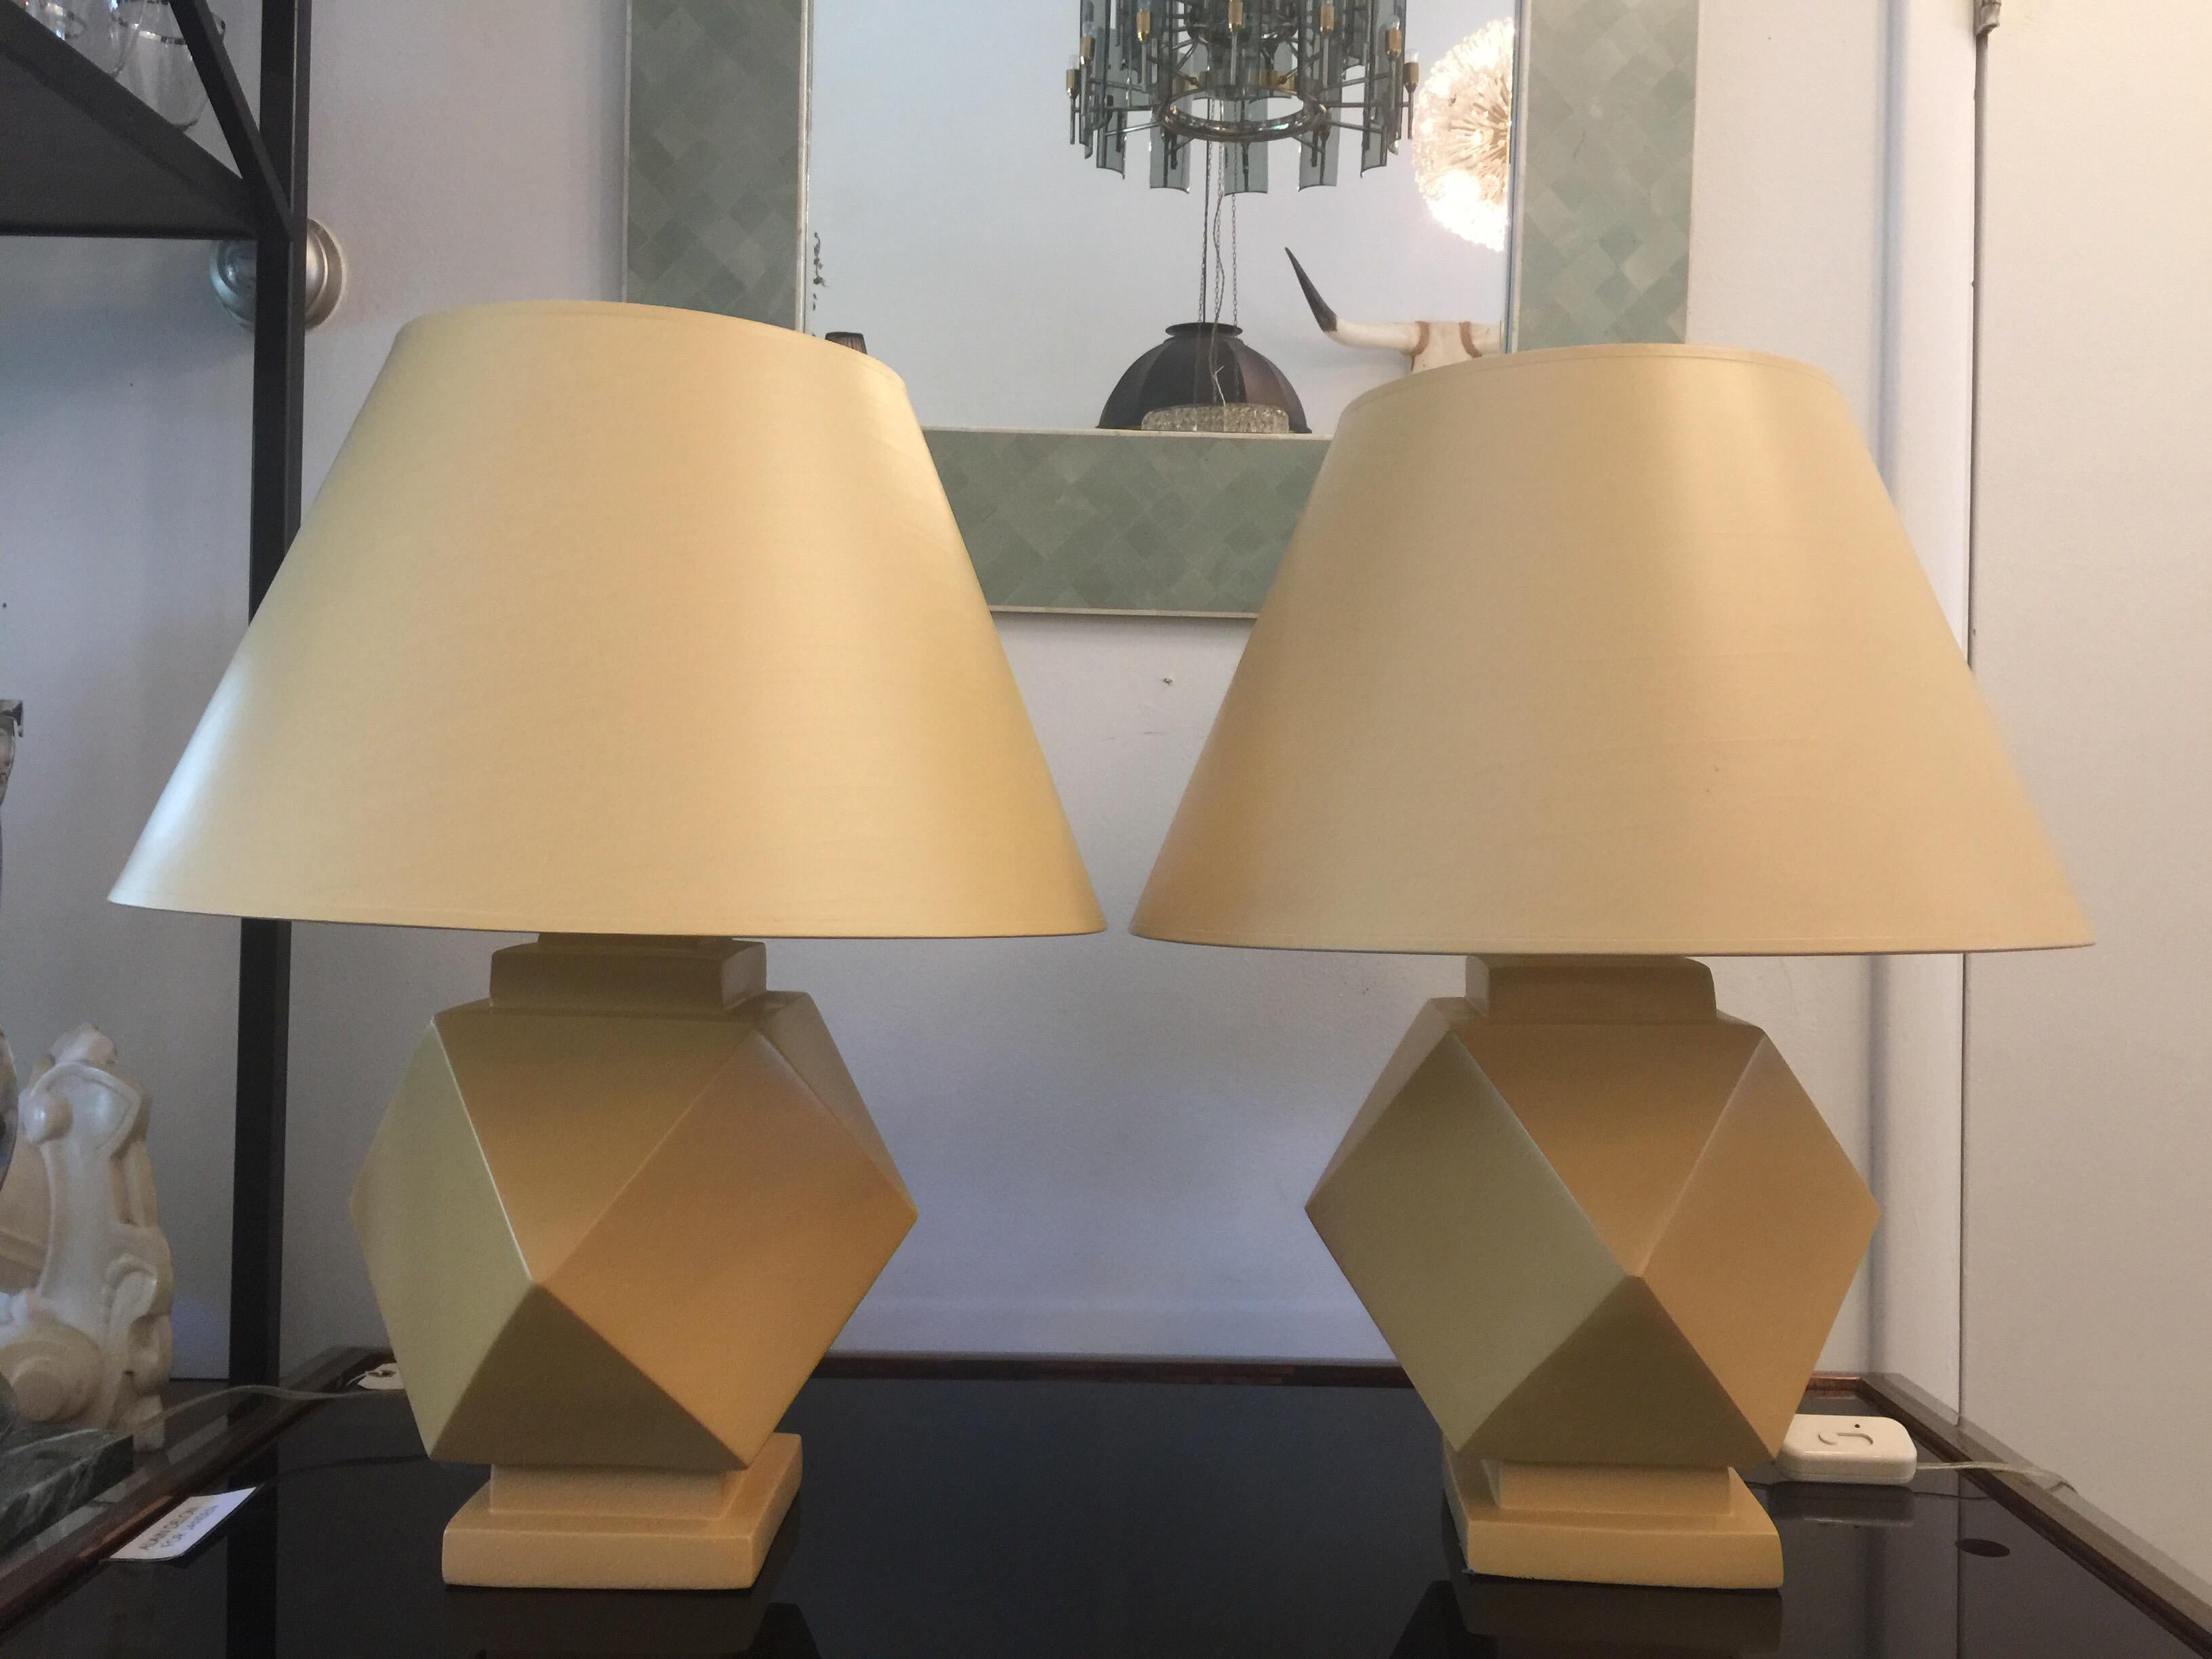 These geometric design important lamps by Sirmos Company in original yellow toned matte finish. Original shades included - double cluster light socket. Labelled.